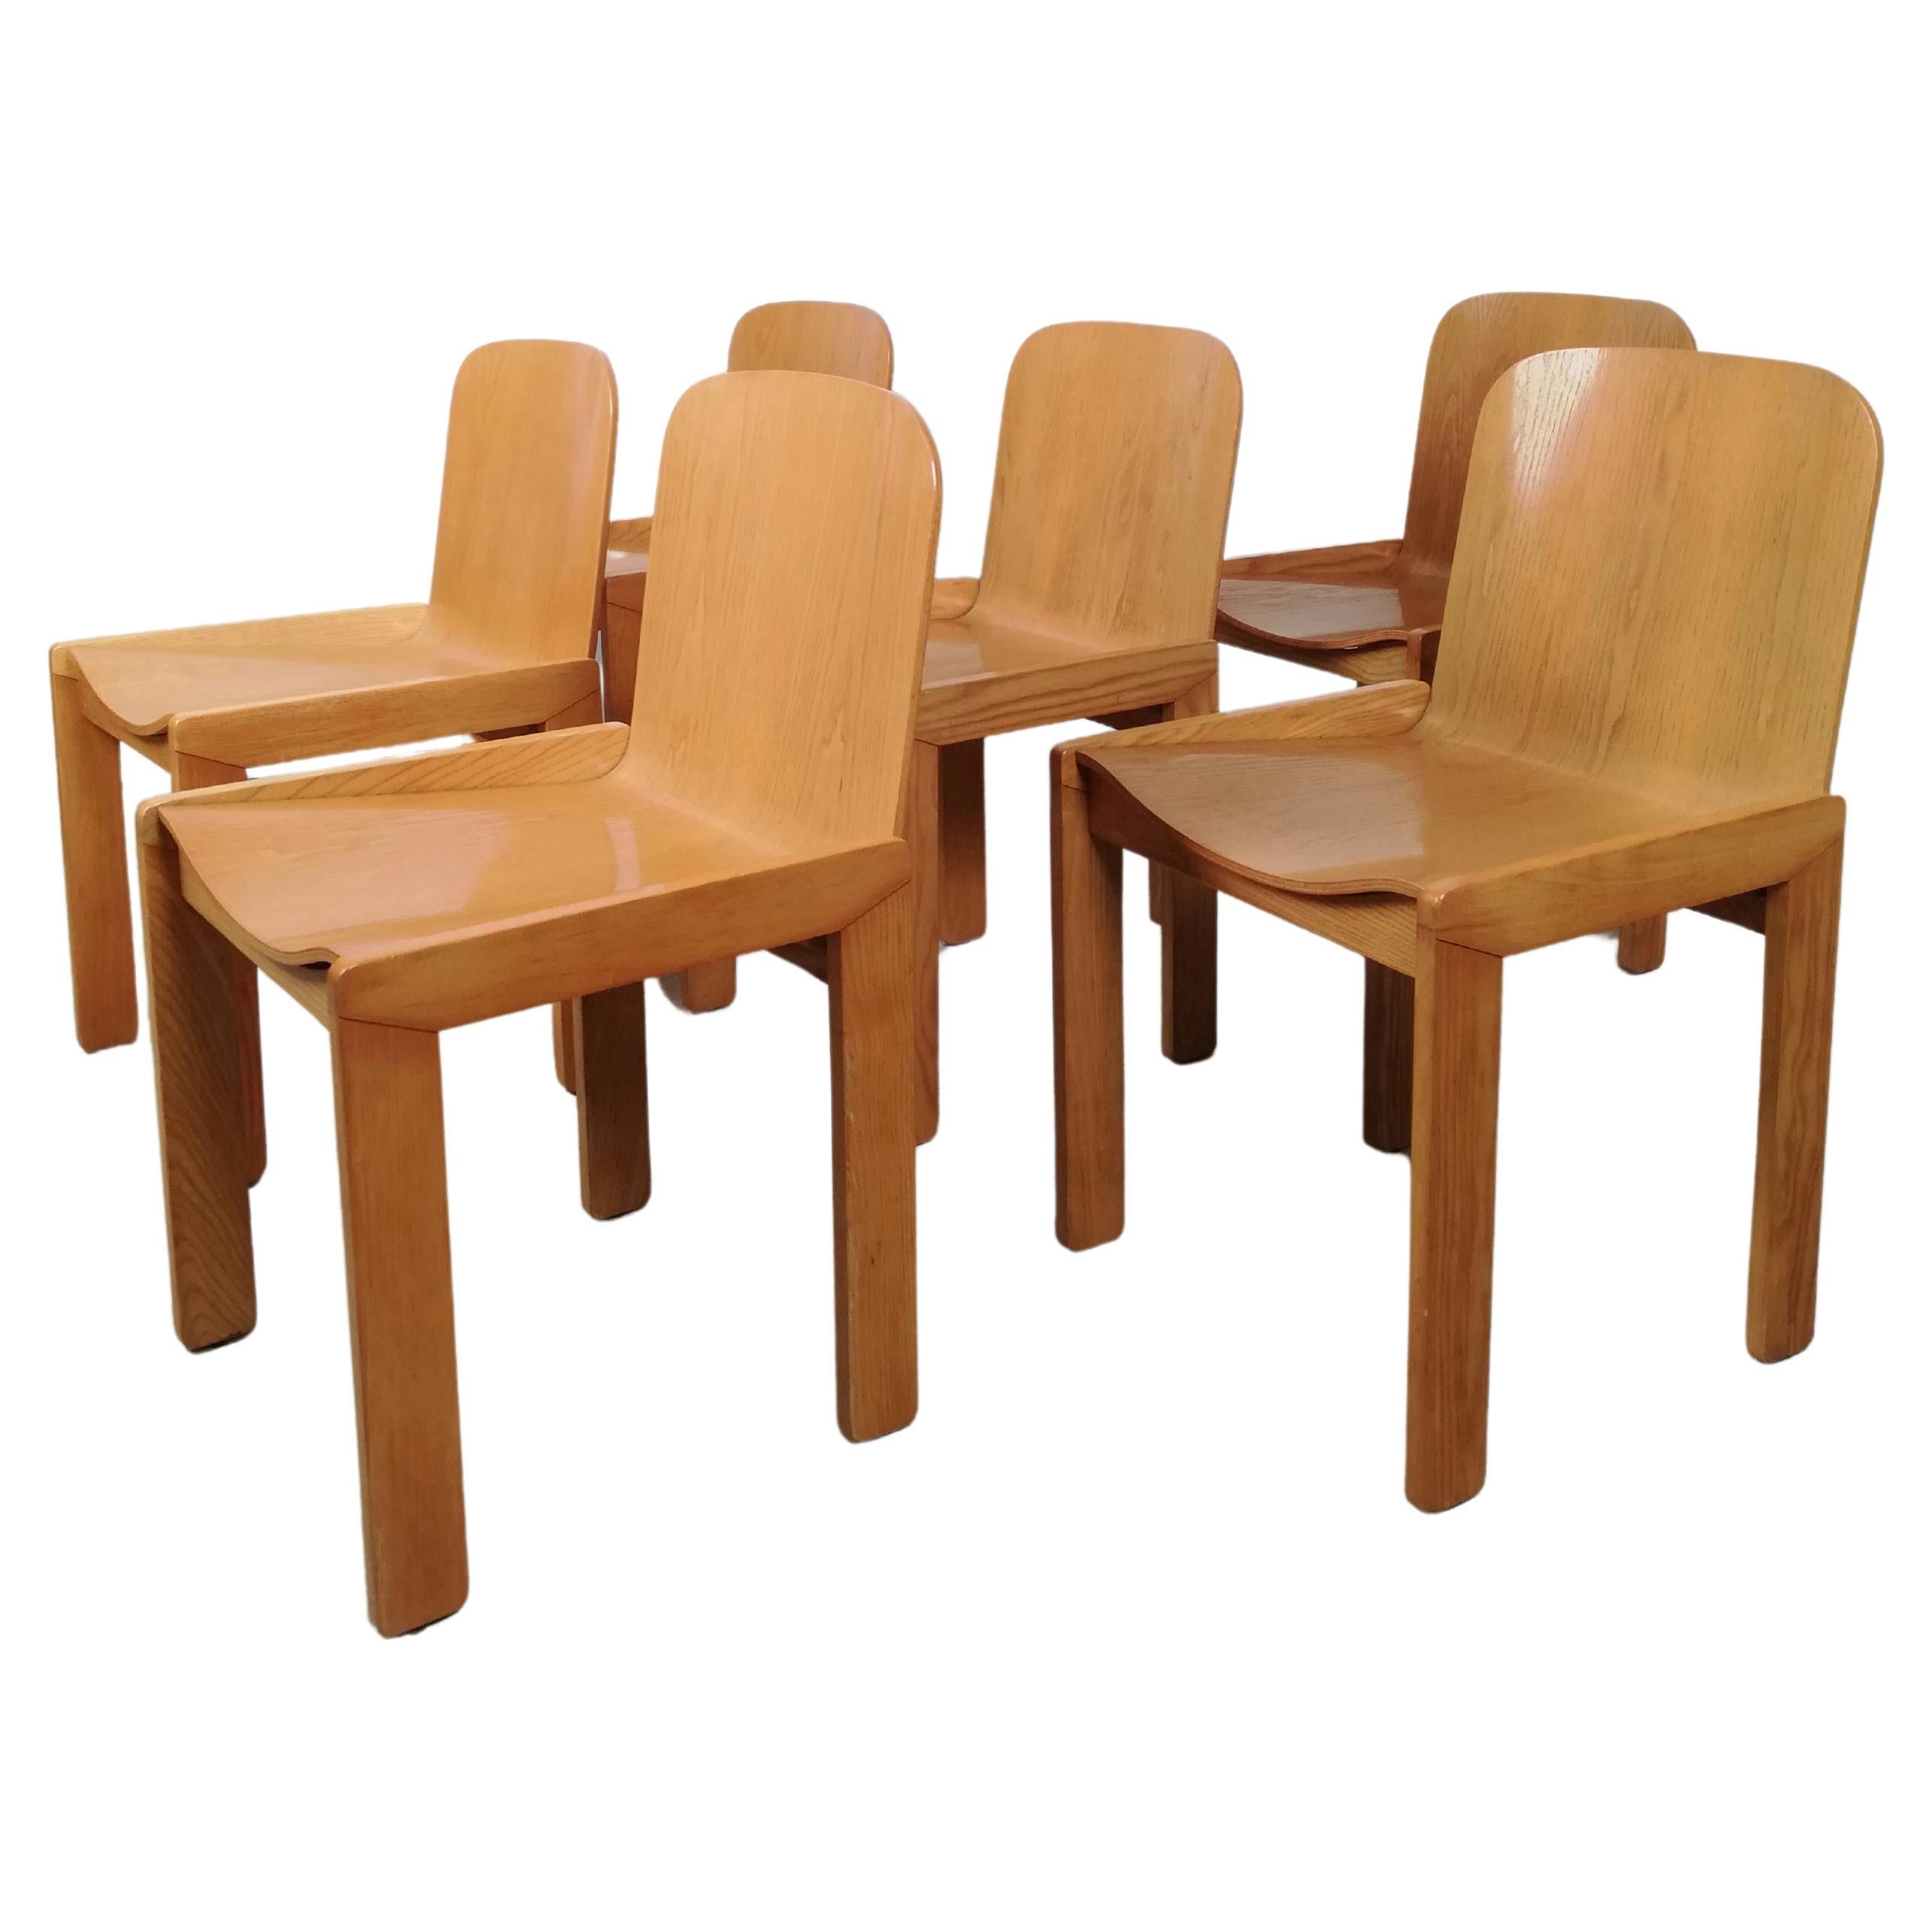 6 Curved Plywood Dining Chairs by Molteni in the style of Scarpa, Italy, 1970s For Sale